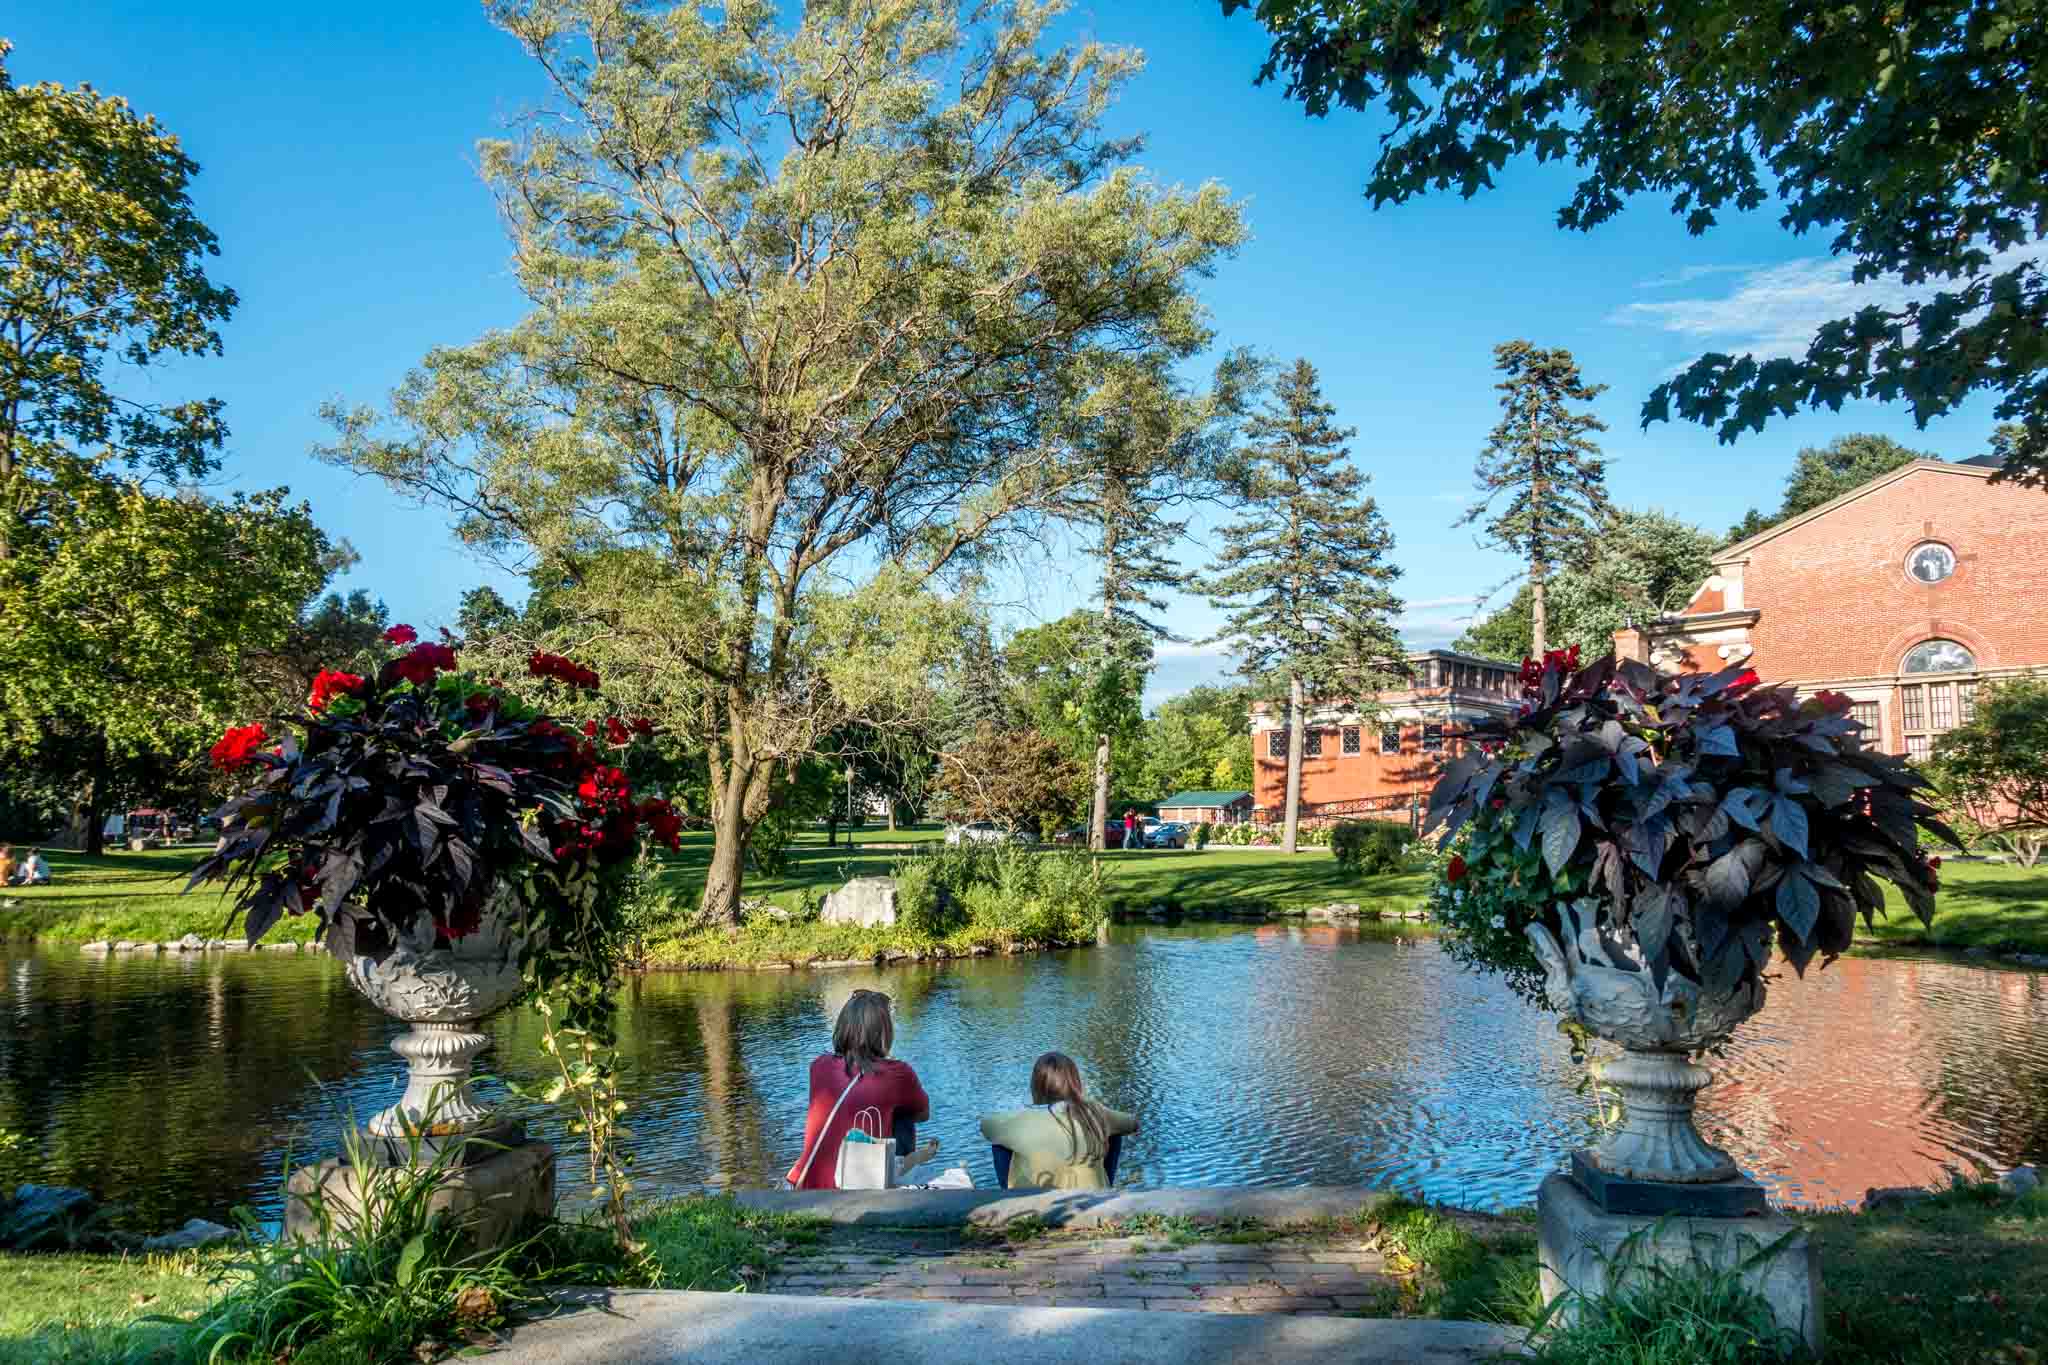 Visiting Congress Park is one of the best things to do in Saratoga Springs, New York